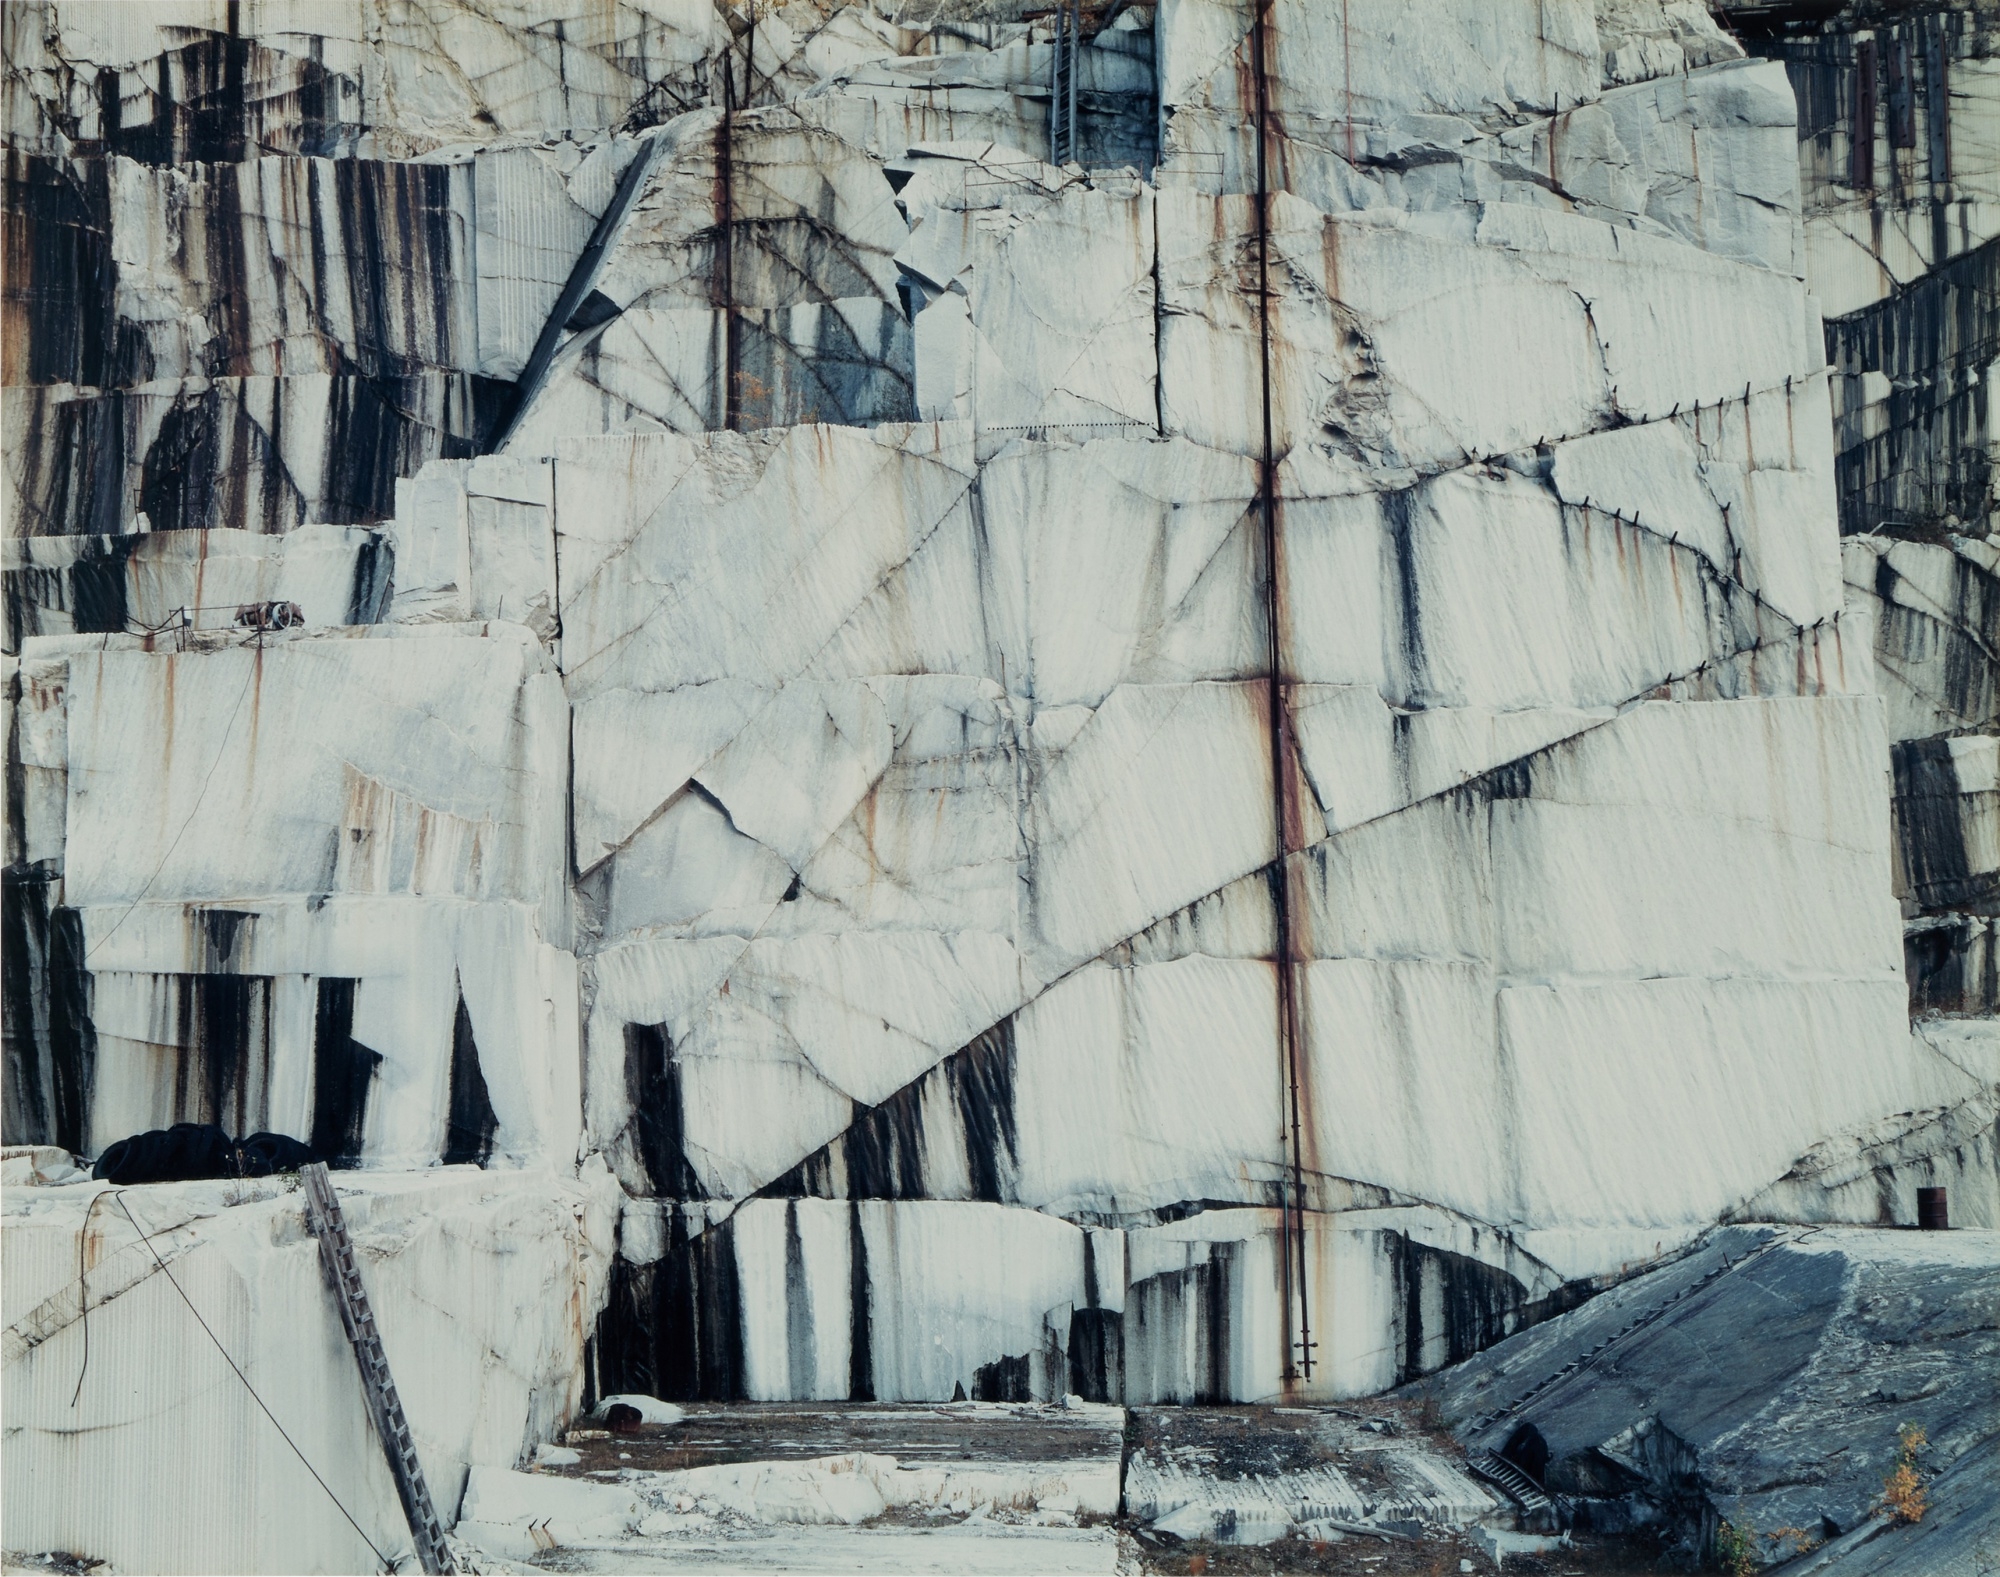 Rock of Ages #10, Abandoned Granite Quarry, Barre, Vermont - Edward Burtynsky